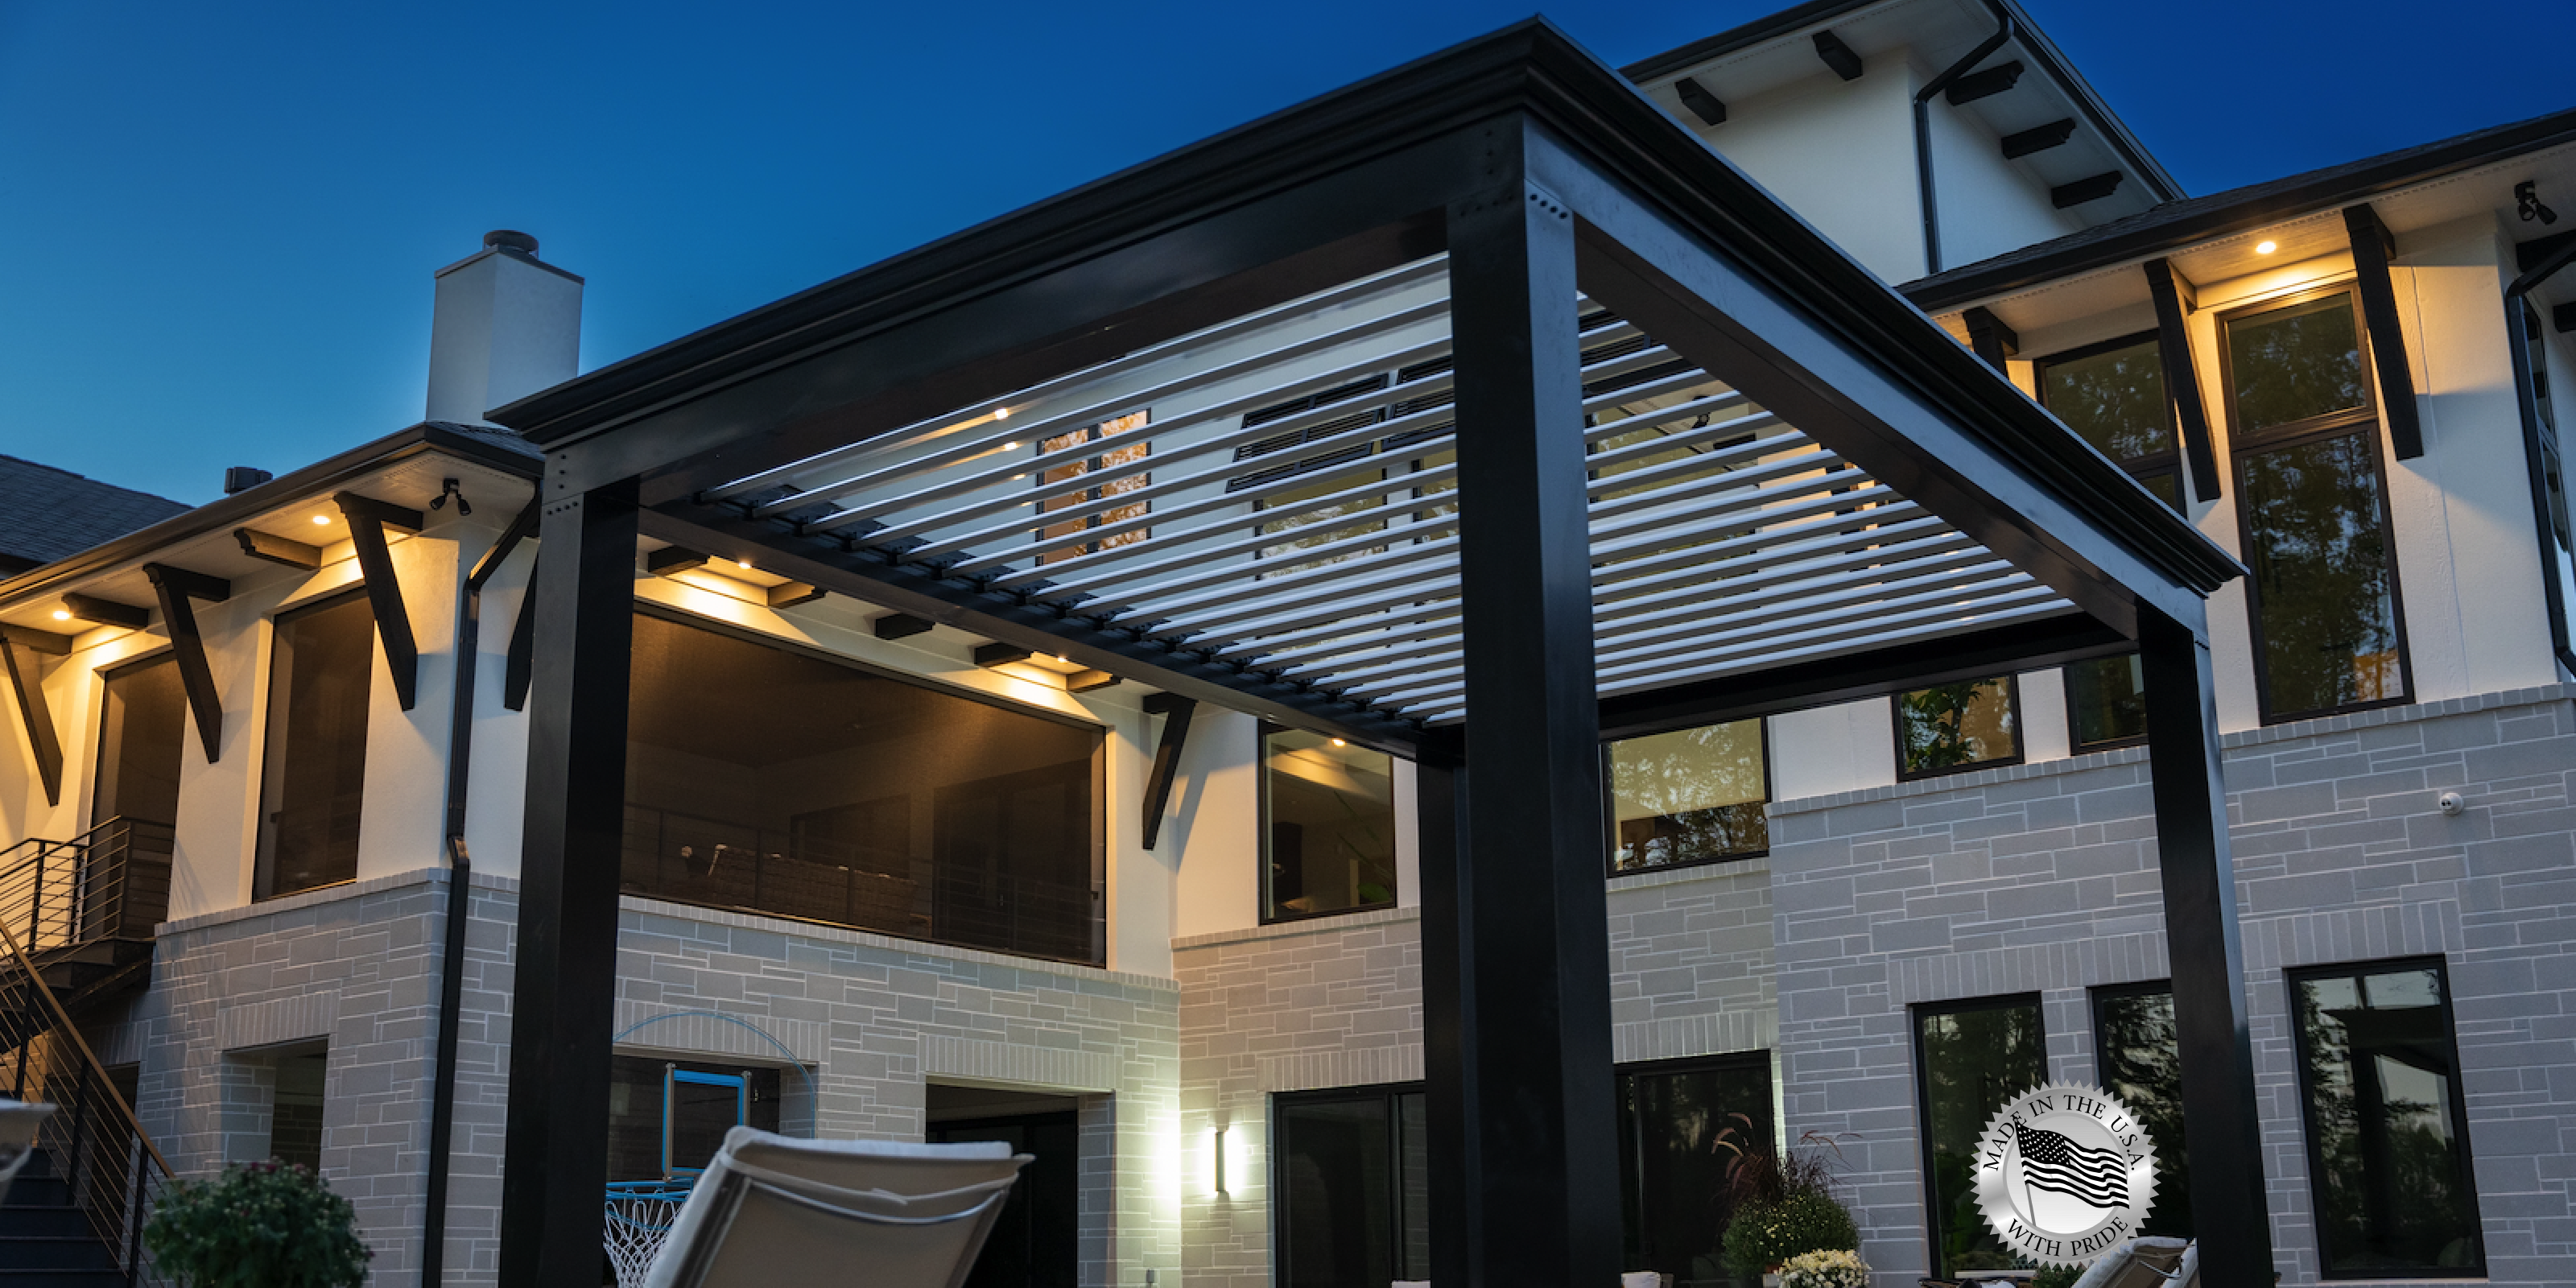 Modern Style Pergolas best for outdoor living space using modern materials